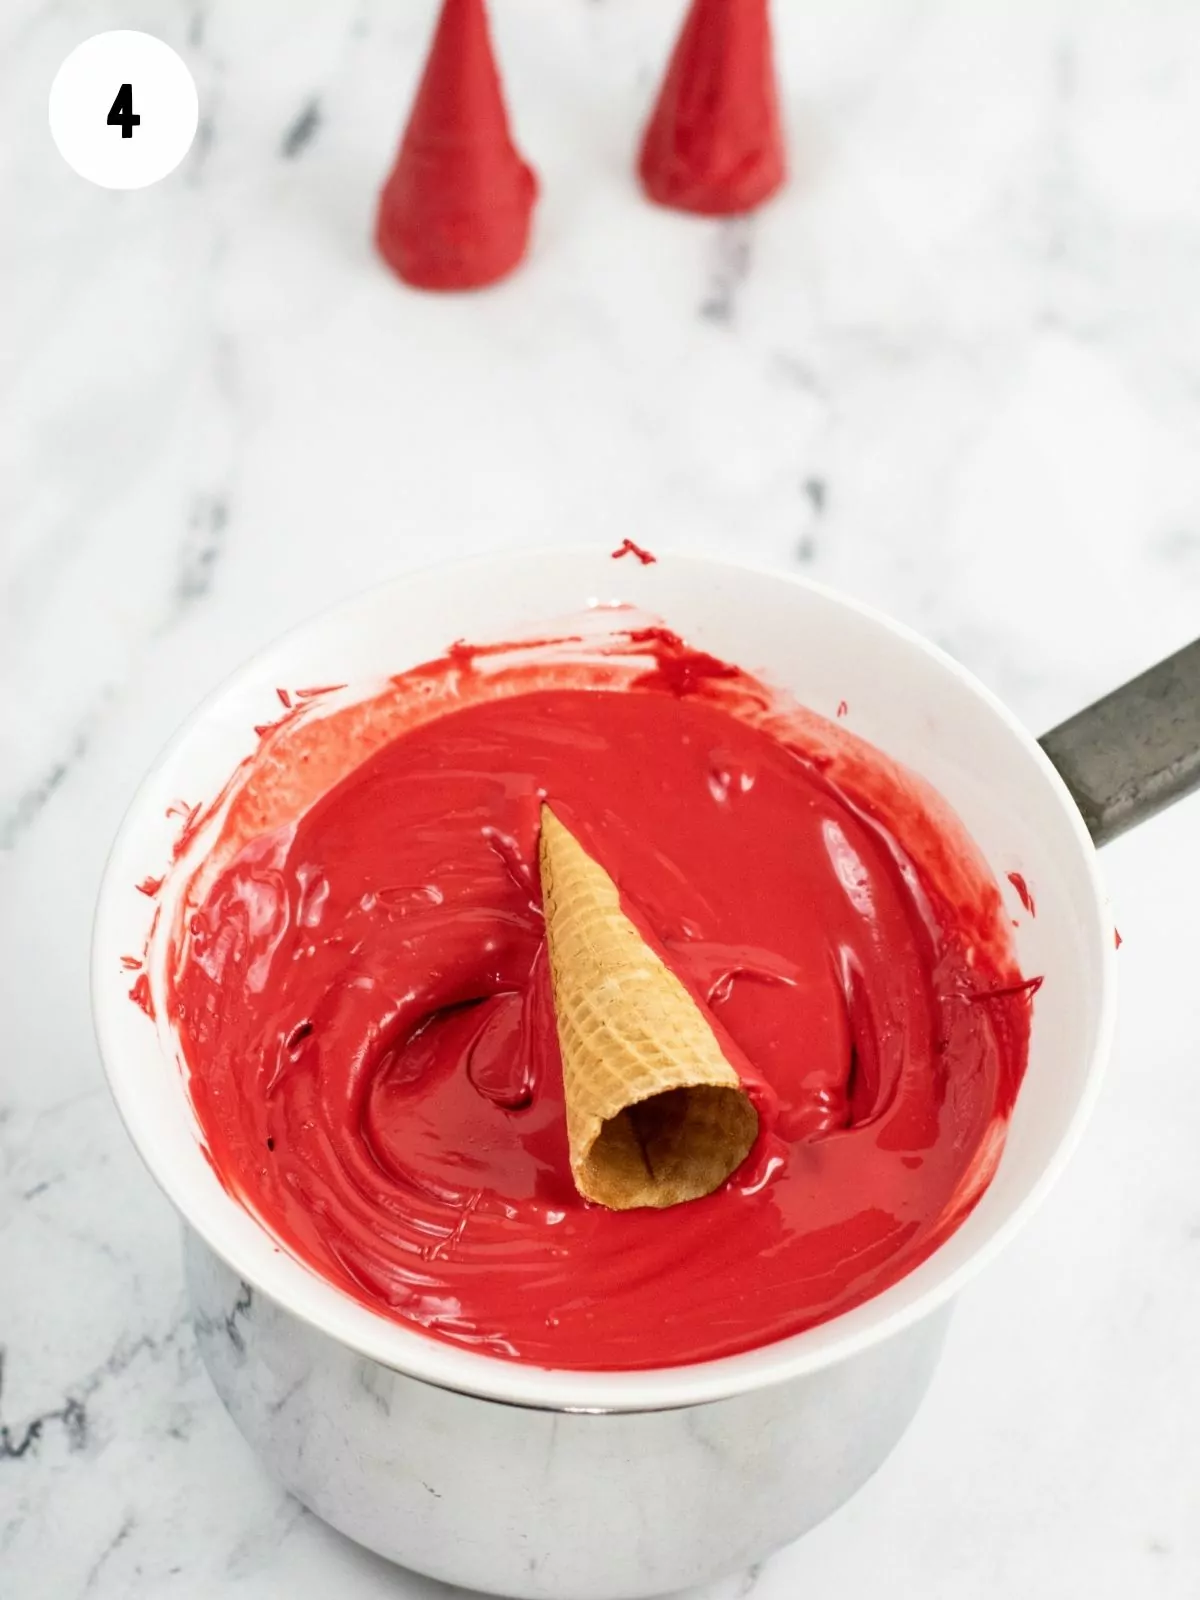 Ice cream cone being dipped in melted red candy pieces.